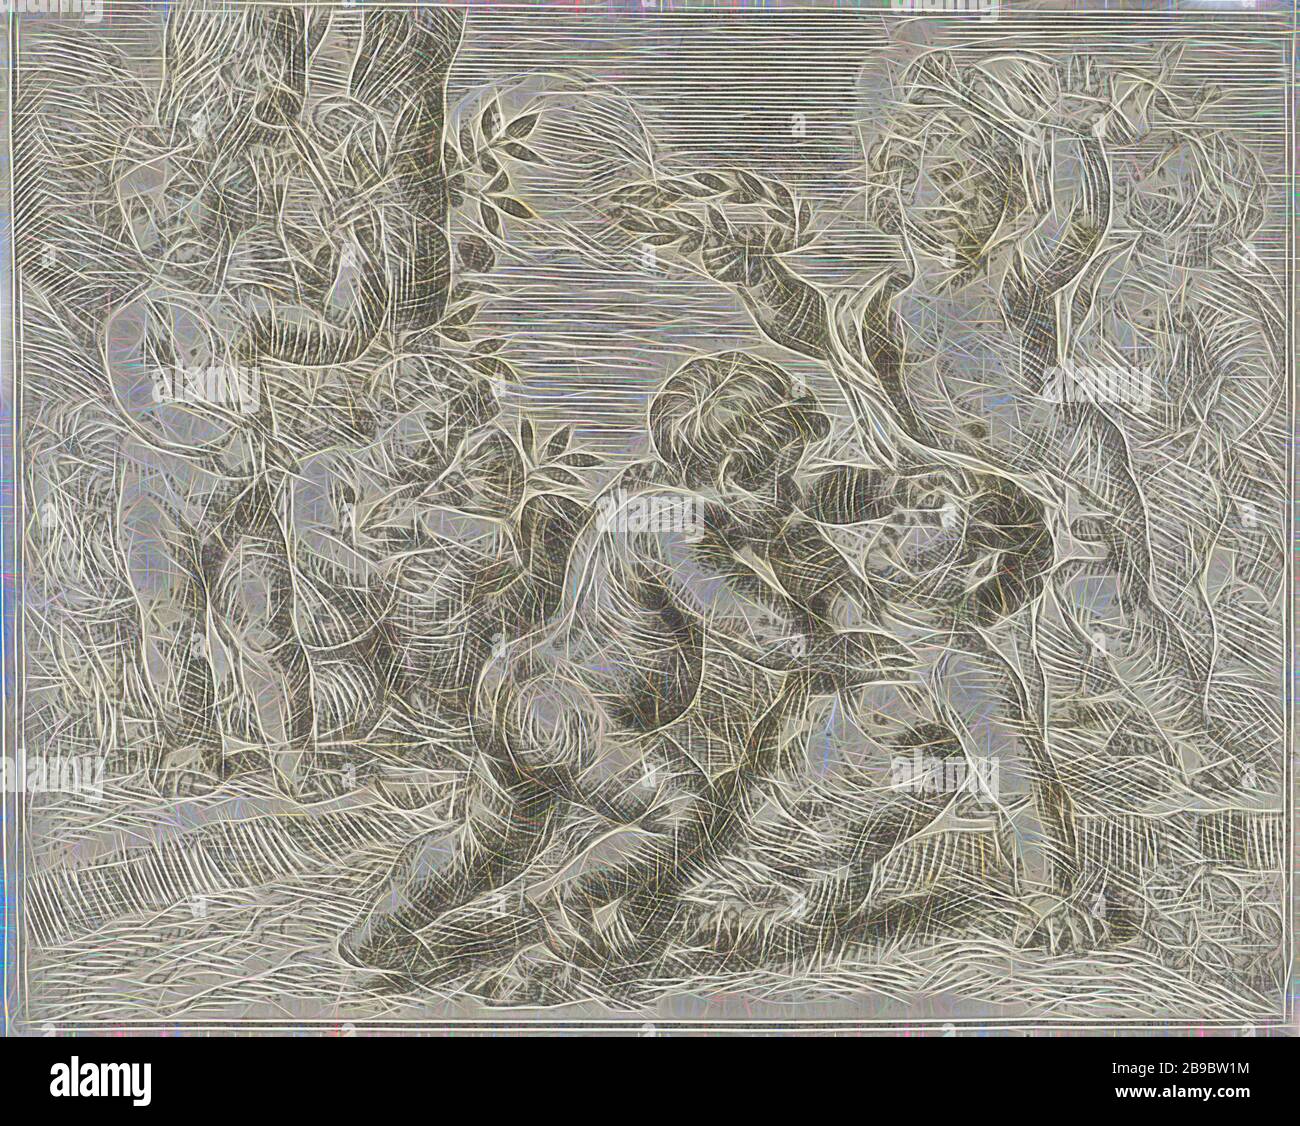 Fighting putti Fight between virtue and vice, Two fighting putti in the foreground symbolize the struggle between virtue and vice. To the right is a putto with laurel wreath ready for the victor, to the left is a putto with a caduceus. In the background, a putto blows the trumpet, another putto holds a bird in his arms, figure representing a Virtue. a Vice, cupids: 'amores', 'amoretti', 'putti', Peter van Lint, 1619 - 1690, paper, etching, h 156 mm × w 126 mm, Reimagined by Gibon, design of warm cheerful glowing of brightness and light rays radiance. Classic art reinvented with a modern twist. Stock Photo